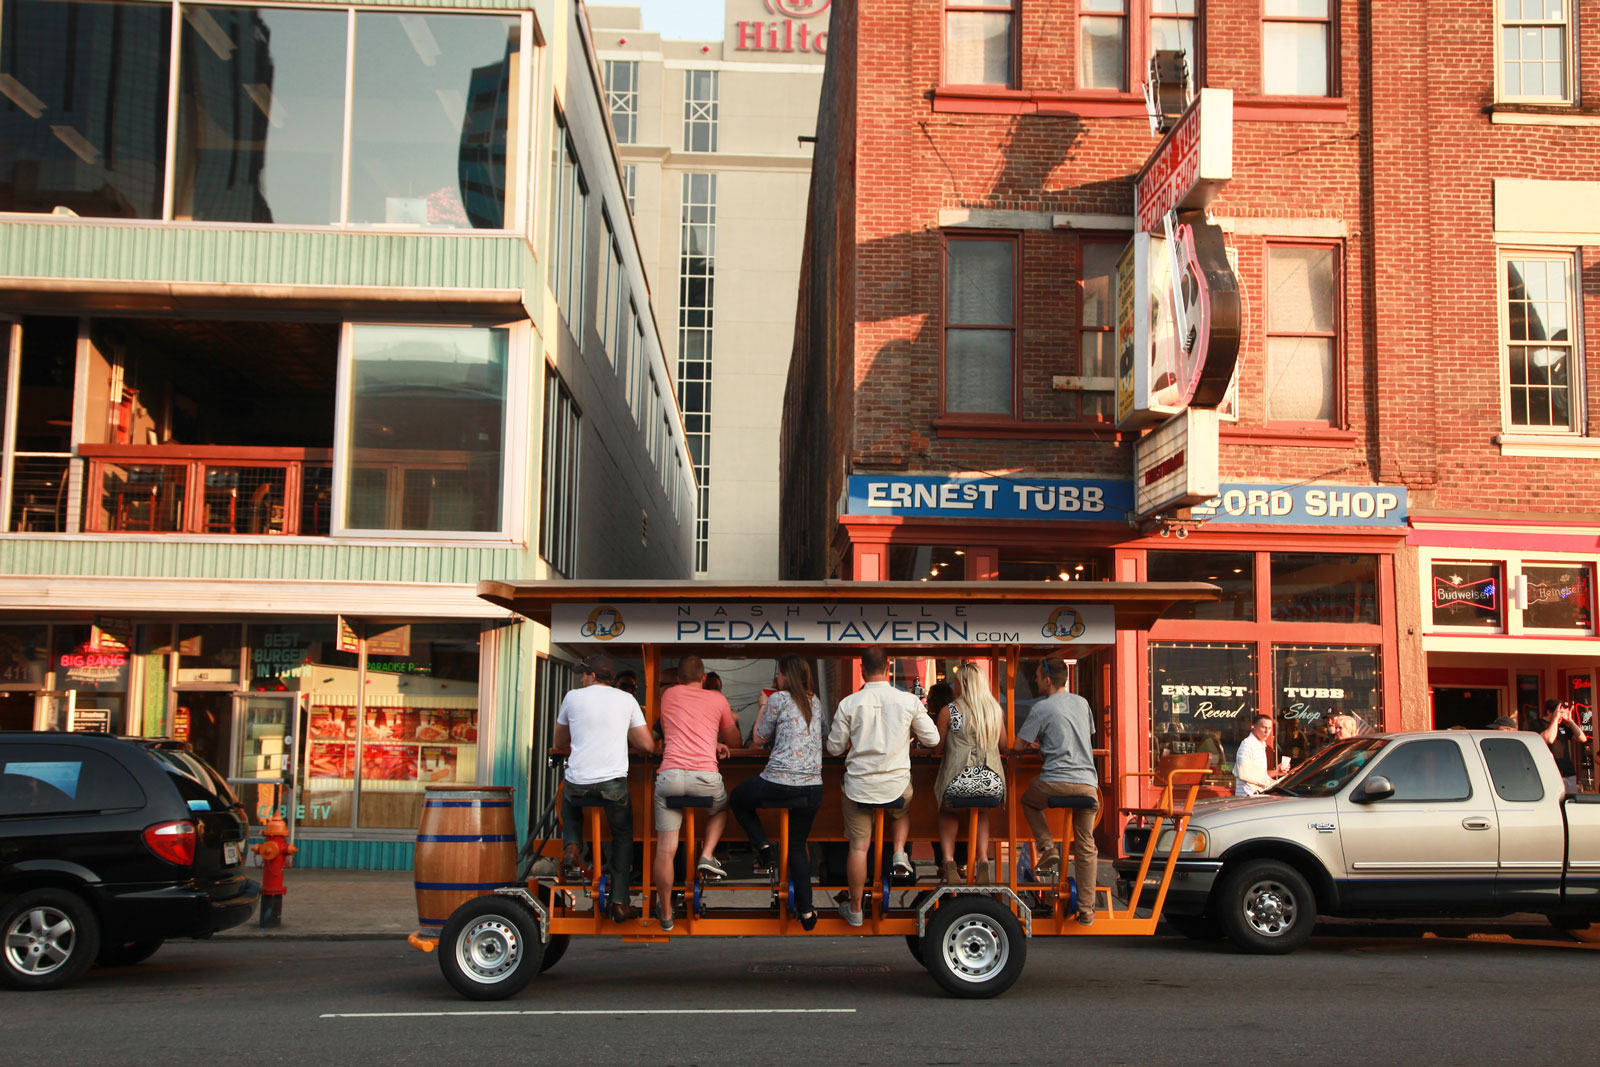 Pedal Tavern Boat moving through downtown Nashville - fun things to do in nashville, nashville attractions, nashville tourist attractions